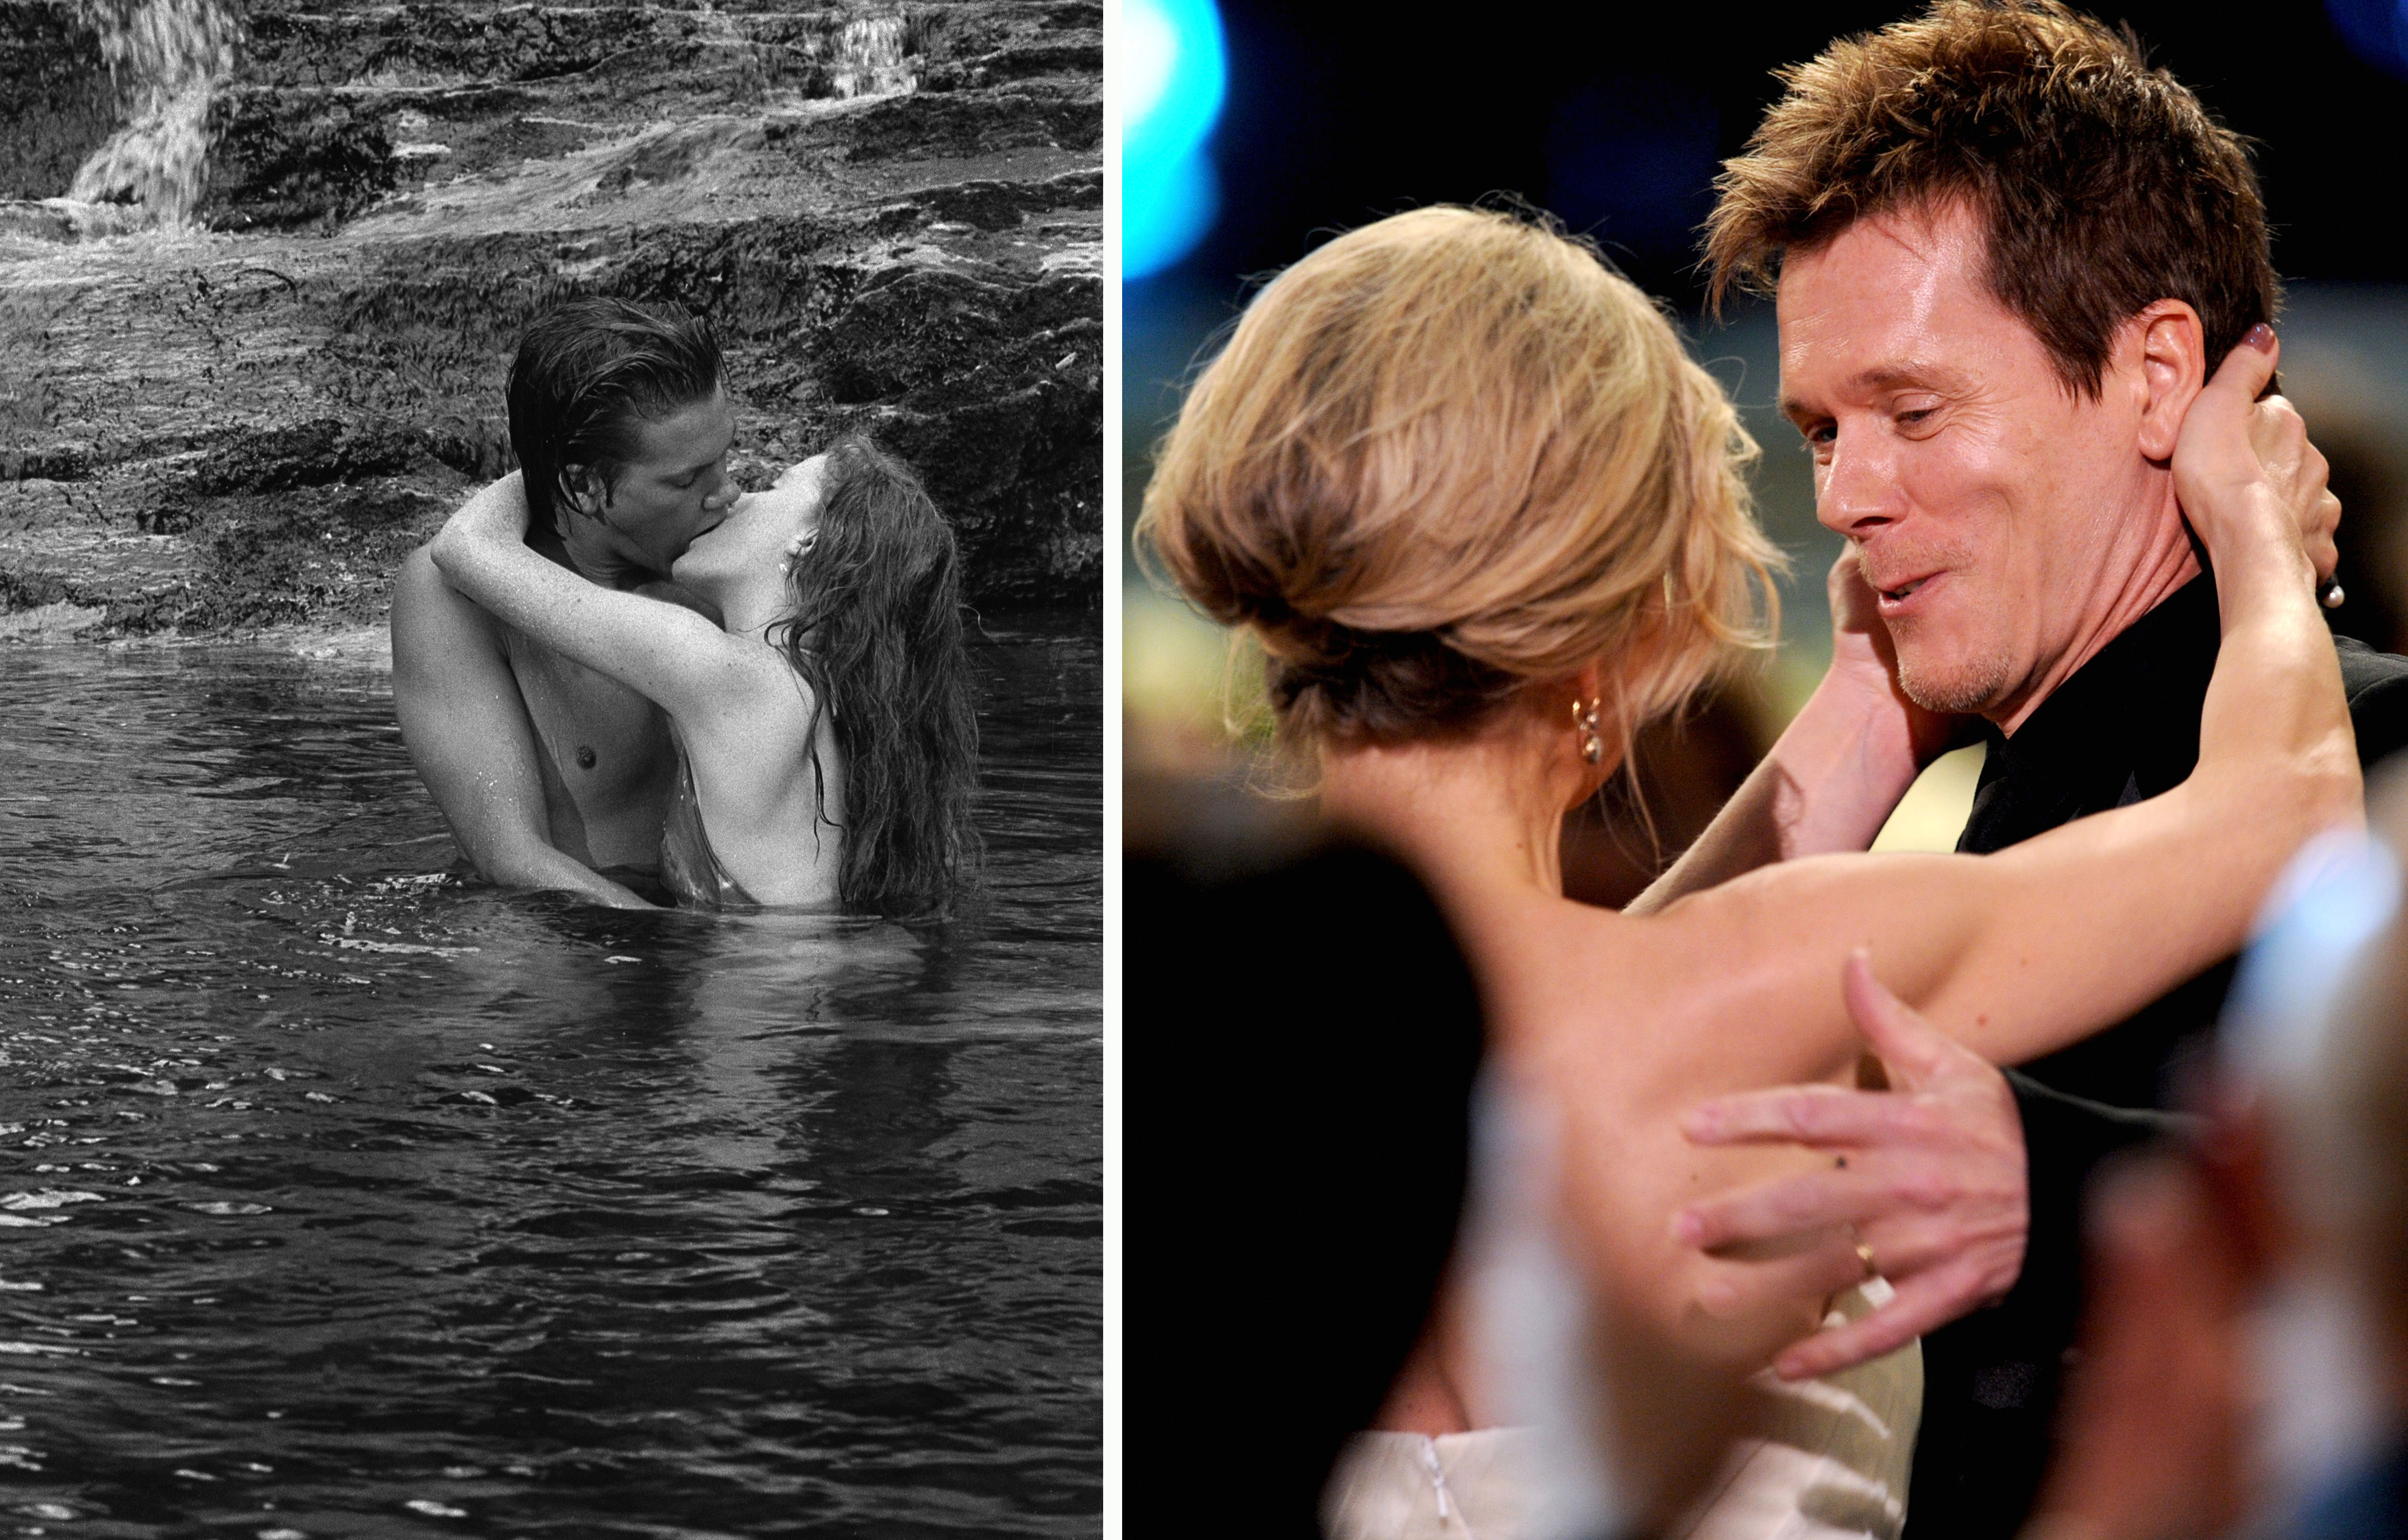 Kevin Bacon as Tim Werner and Kristen Vigard as Morgan Richards appear in a scene on the soap opera 'Guiding Light' on June 24, 1980. | Kyra Sedgwick and Kevin Bacon kiss at the 16th Annual Screen Actors Guild Awards, on January 23, 2010 in Los Angeles, California. | Source: Getty Images